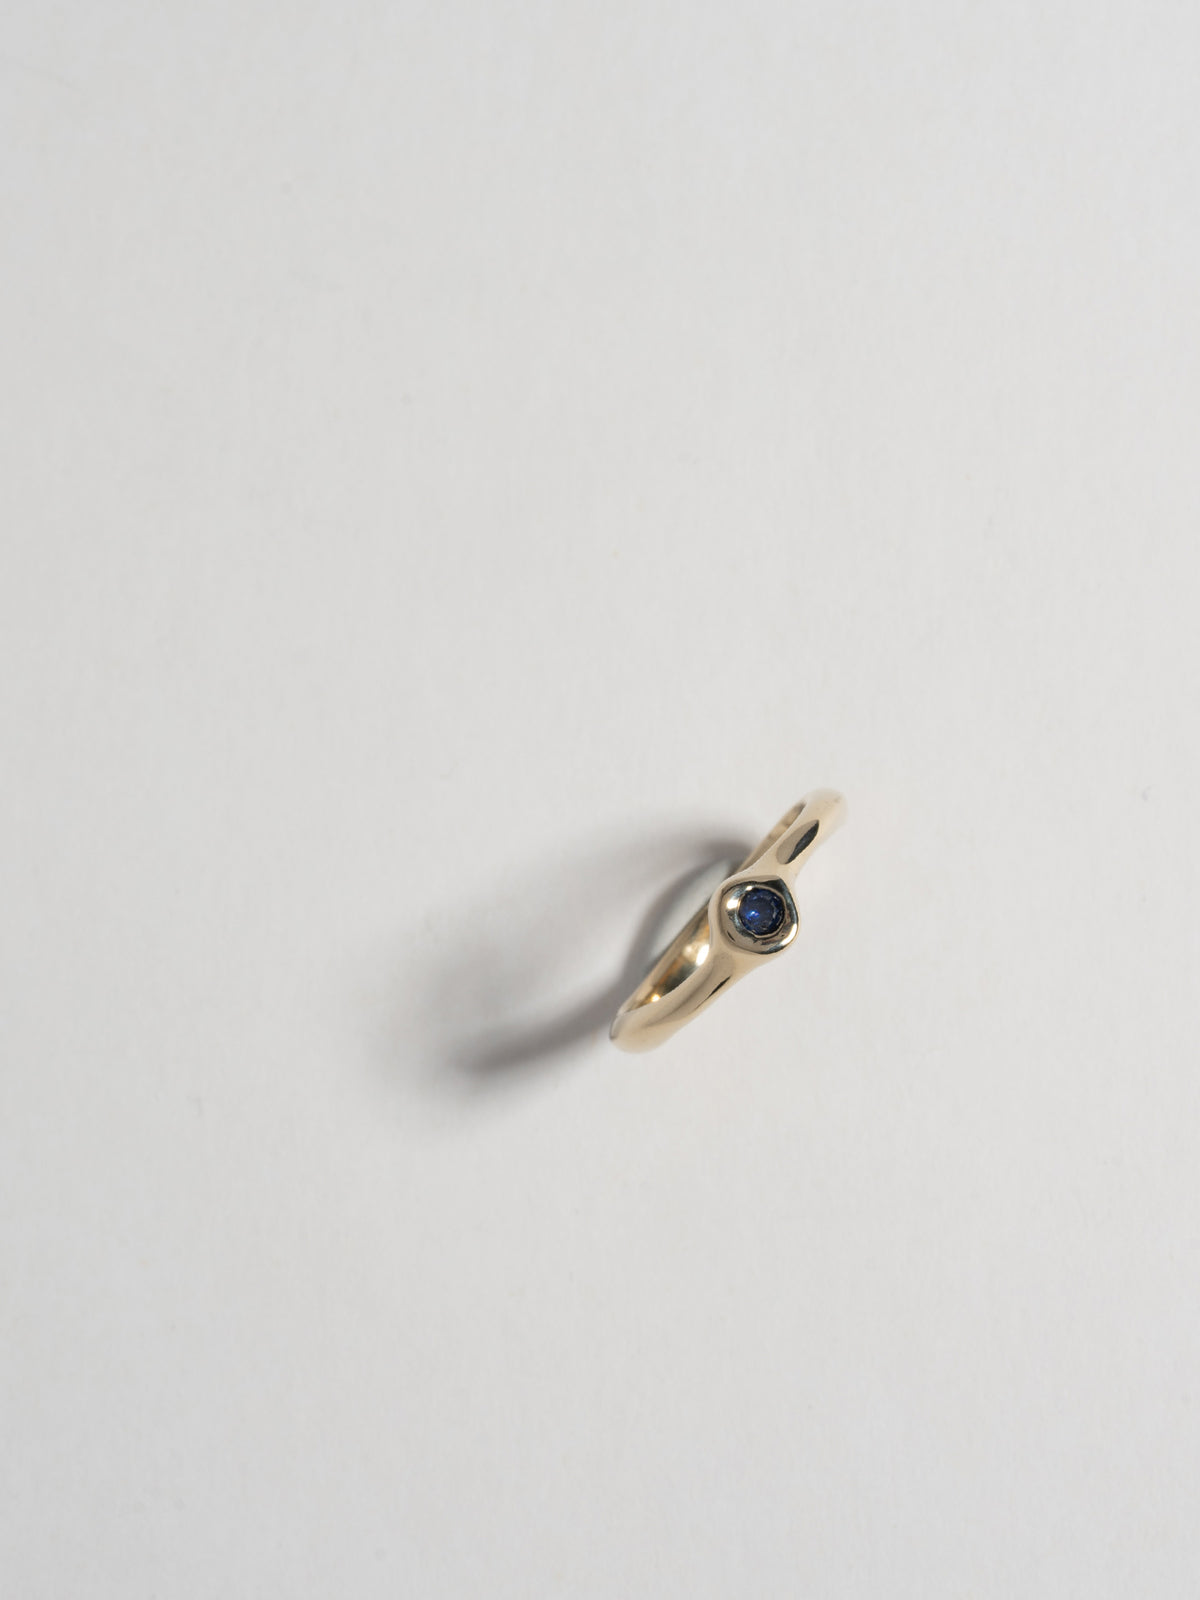 Close up image of FARIS SUGAR Ring in 14k gold with blue sapphire, standing up-right on white background. Front view